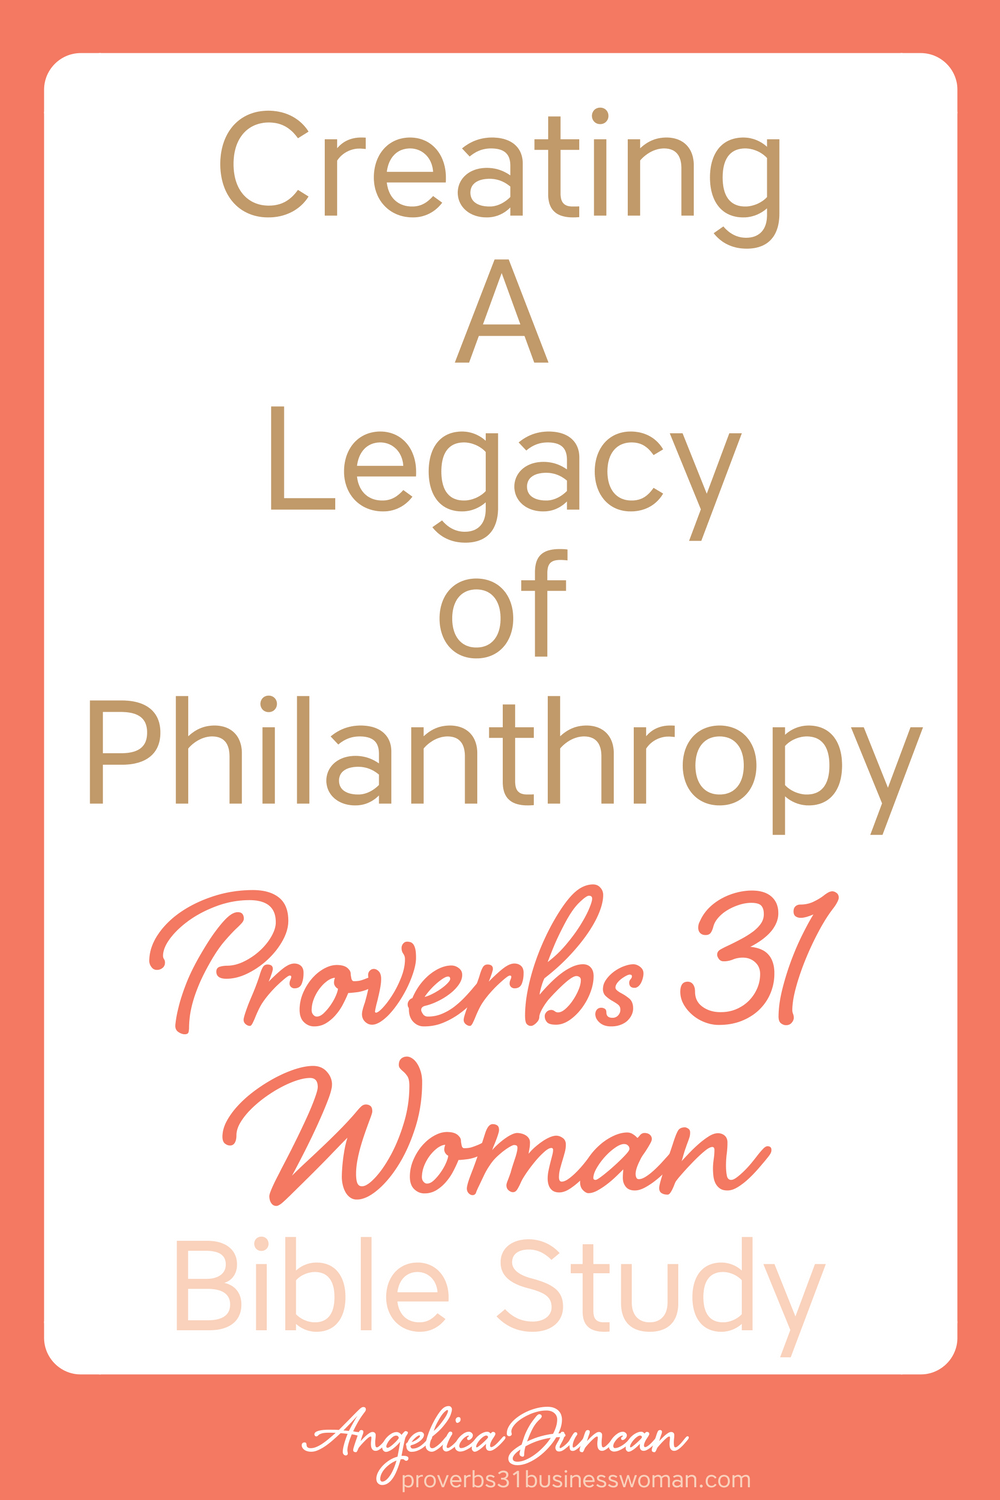 Have you ever considered what creating a Legacy of Philanthropy might look like for you & your family? Let's find out in our Proverbs 31 Woman Bible Study!